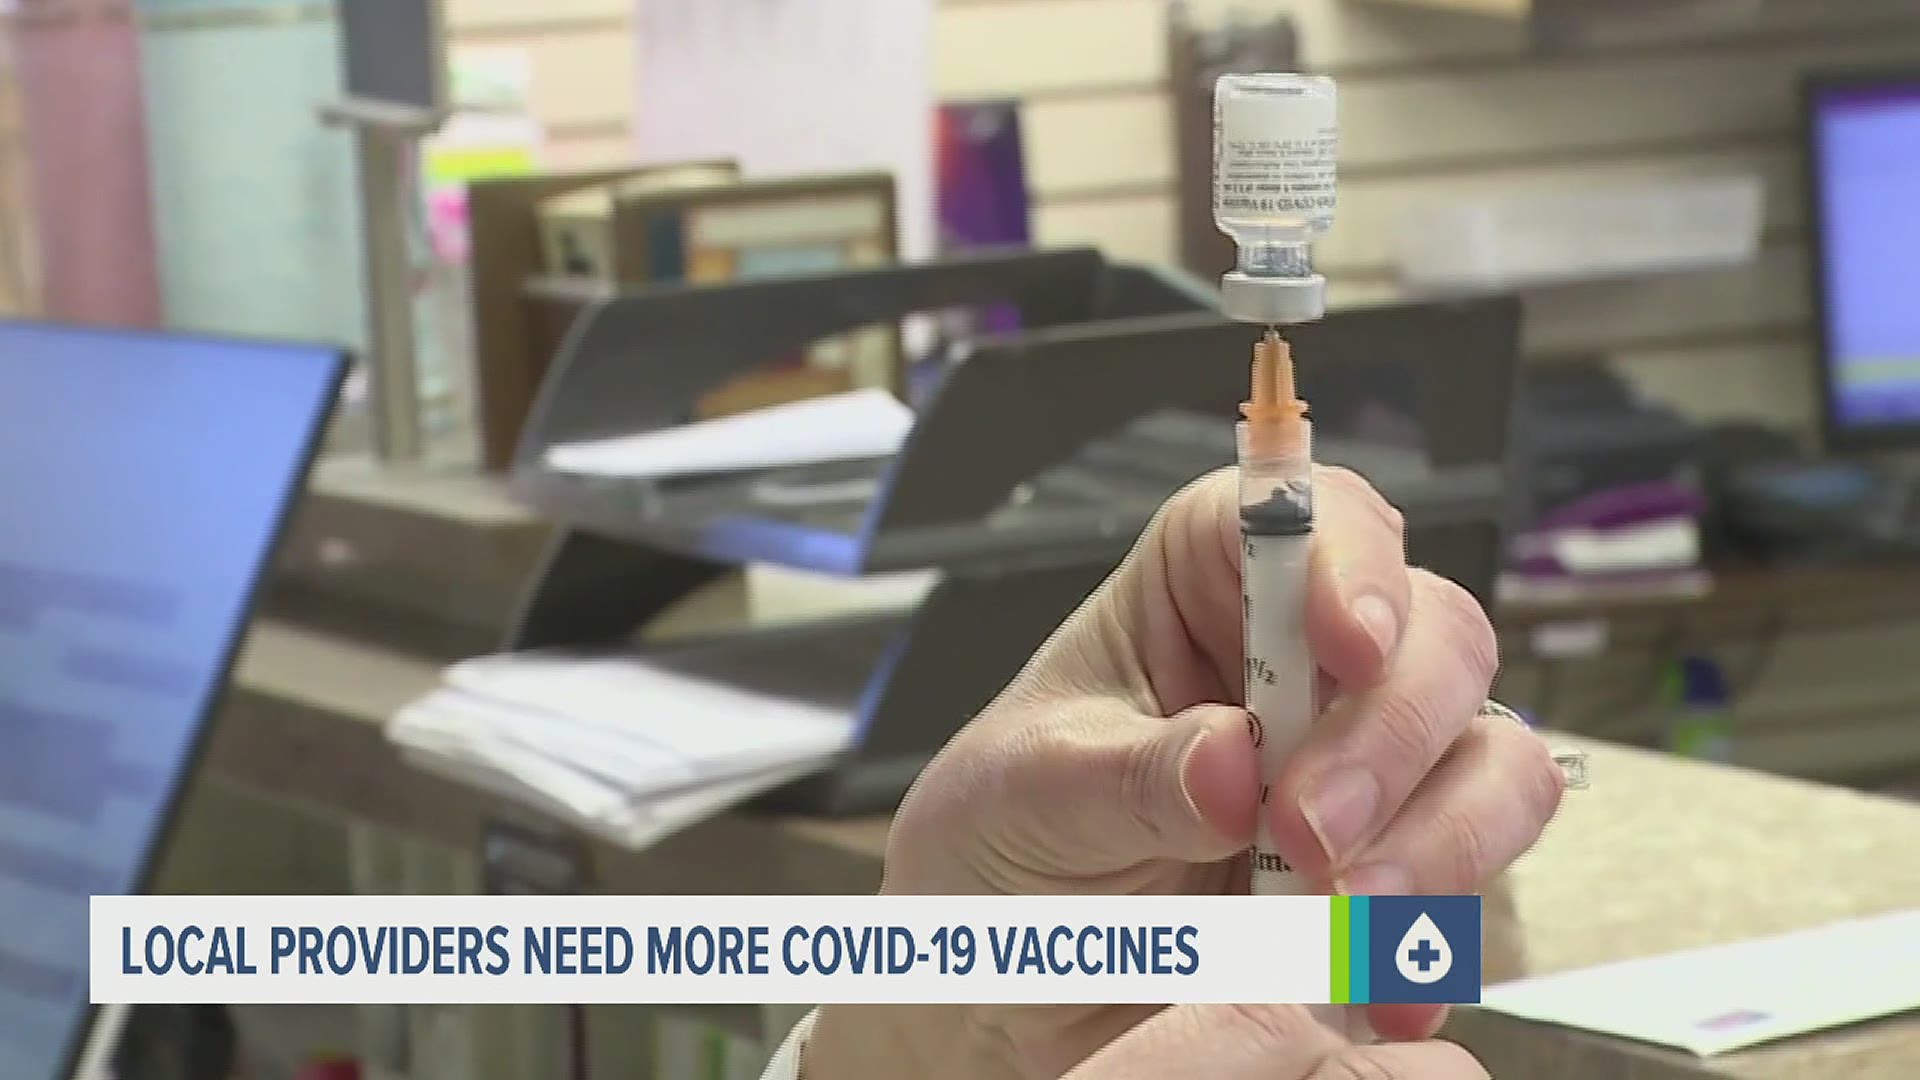 Pharmacy managers in Harrisburg are requesting more vaccine supply as the amount allocated is not enough for their communities